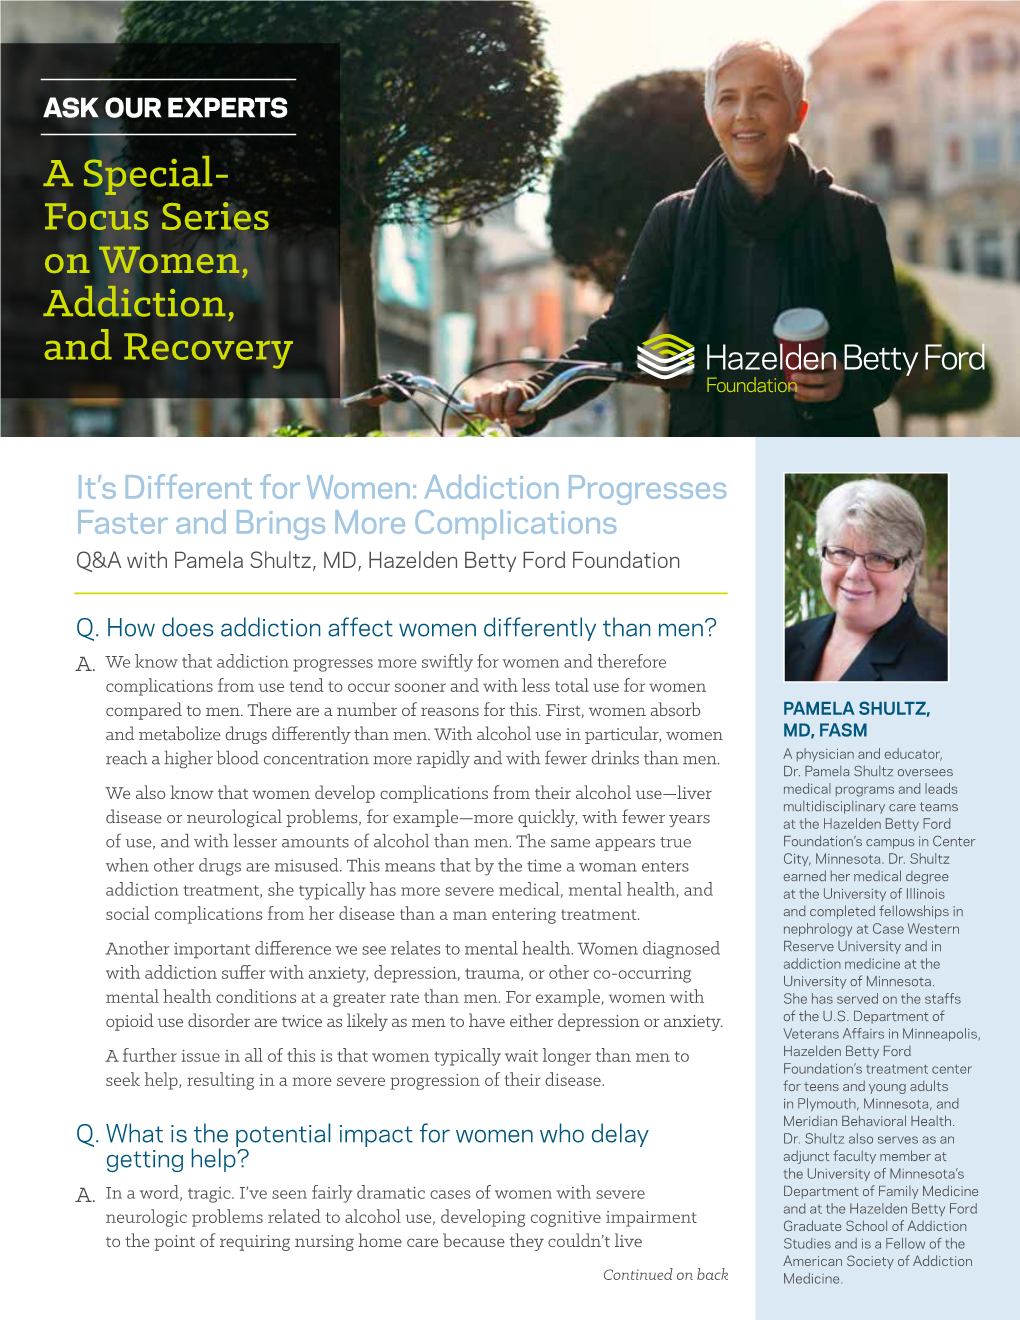 Focus Series on Women, Addiction, and Recovery